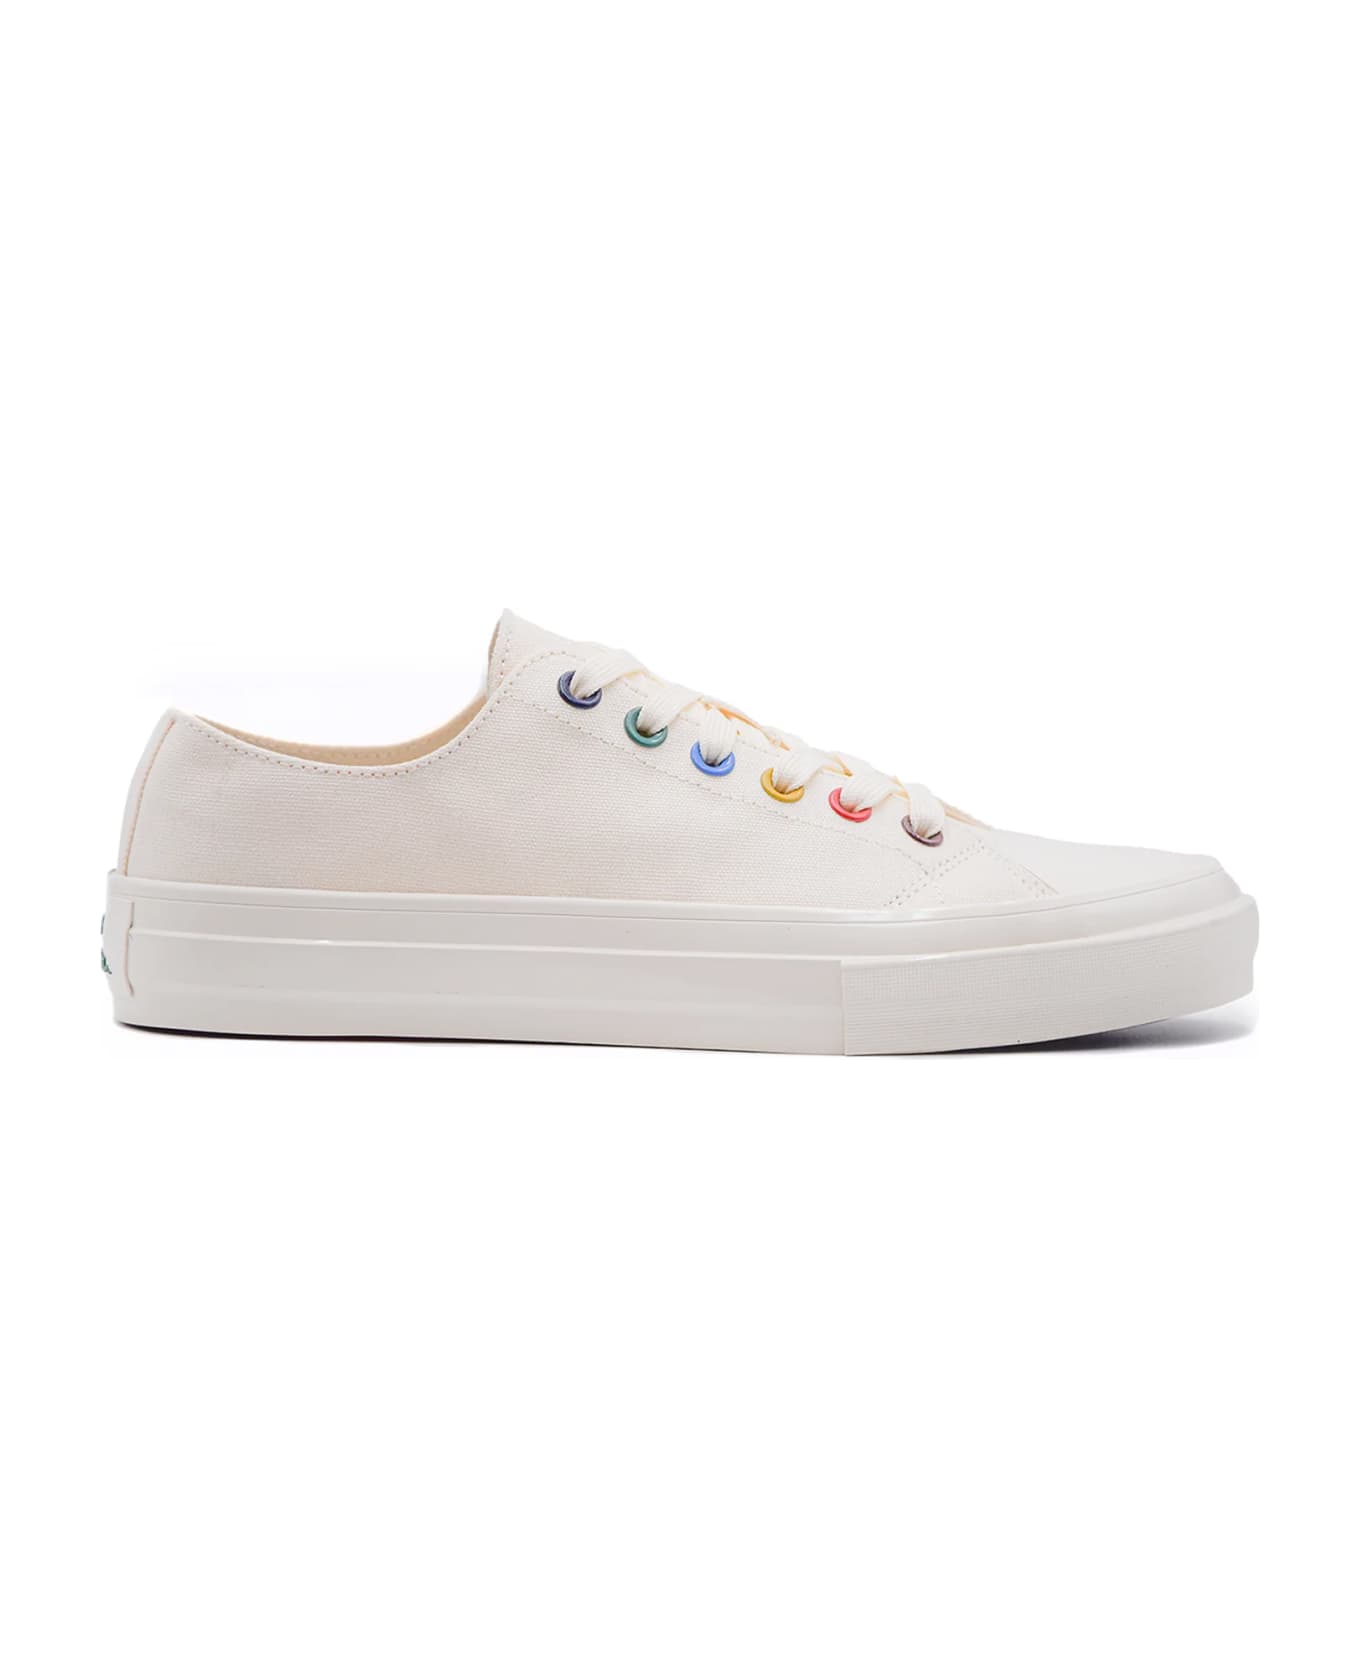 Paul Smith Kinset Canvas Sneakers - White